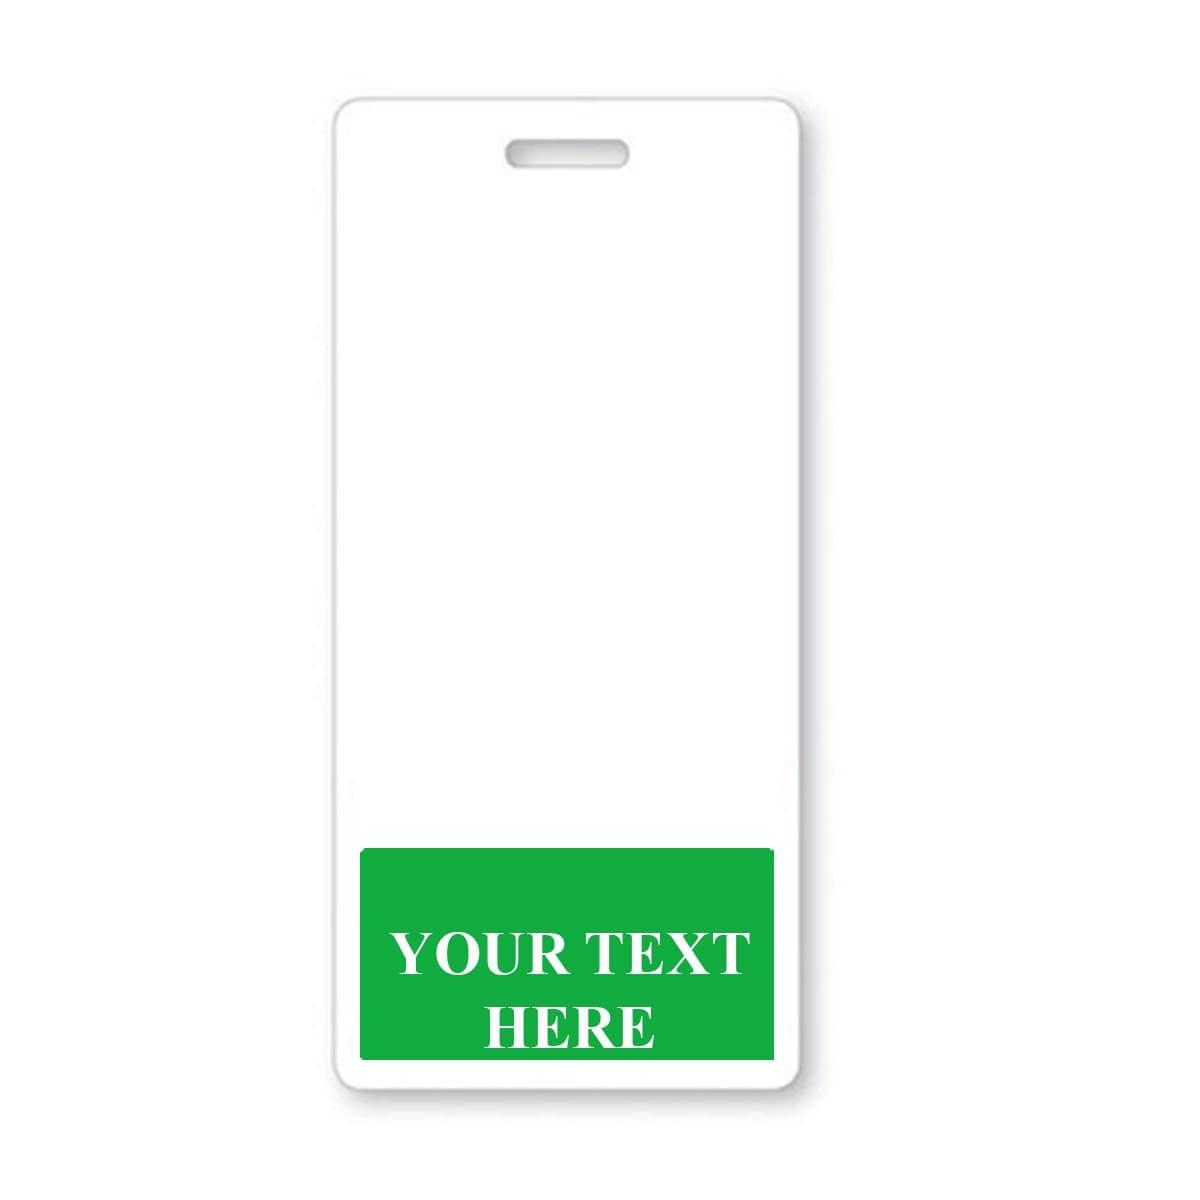 A Custom Printed Badge Buddy Vertical (Standard Size) identification card with a green section at the bottom displaying the text "YOUR TEXT HERE" offers an ideal solution for custom badge buddies, ensuring instant role recognition.